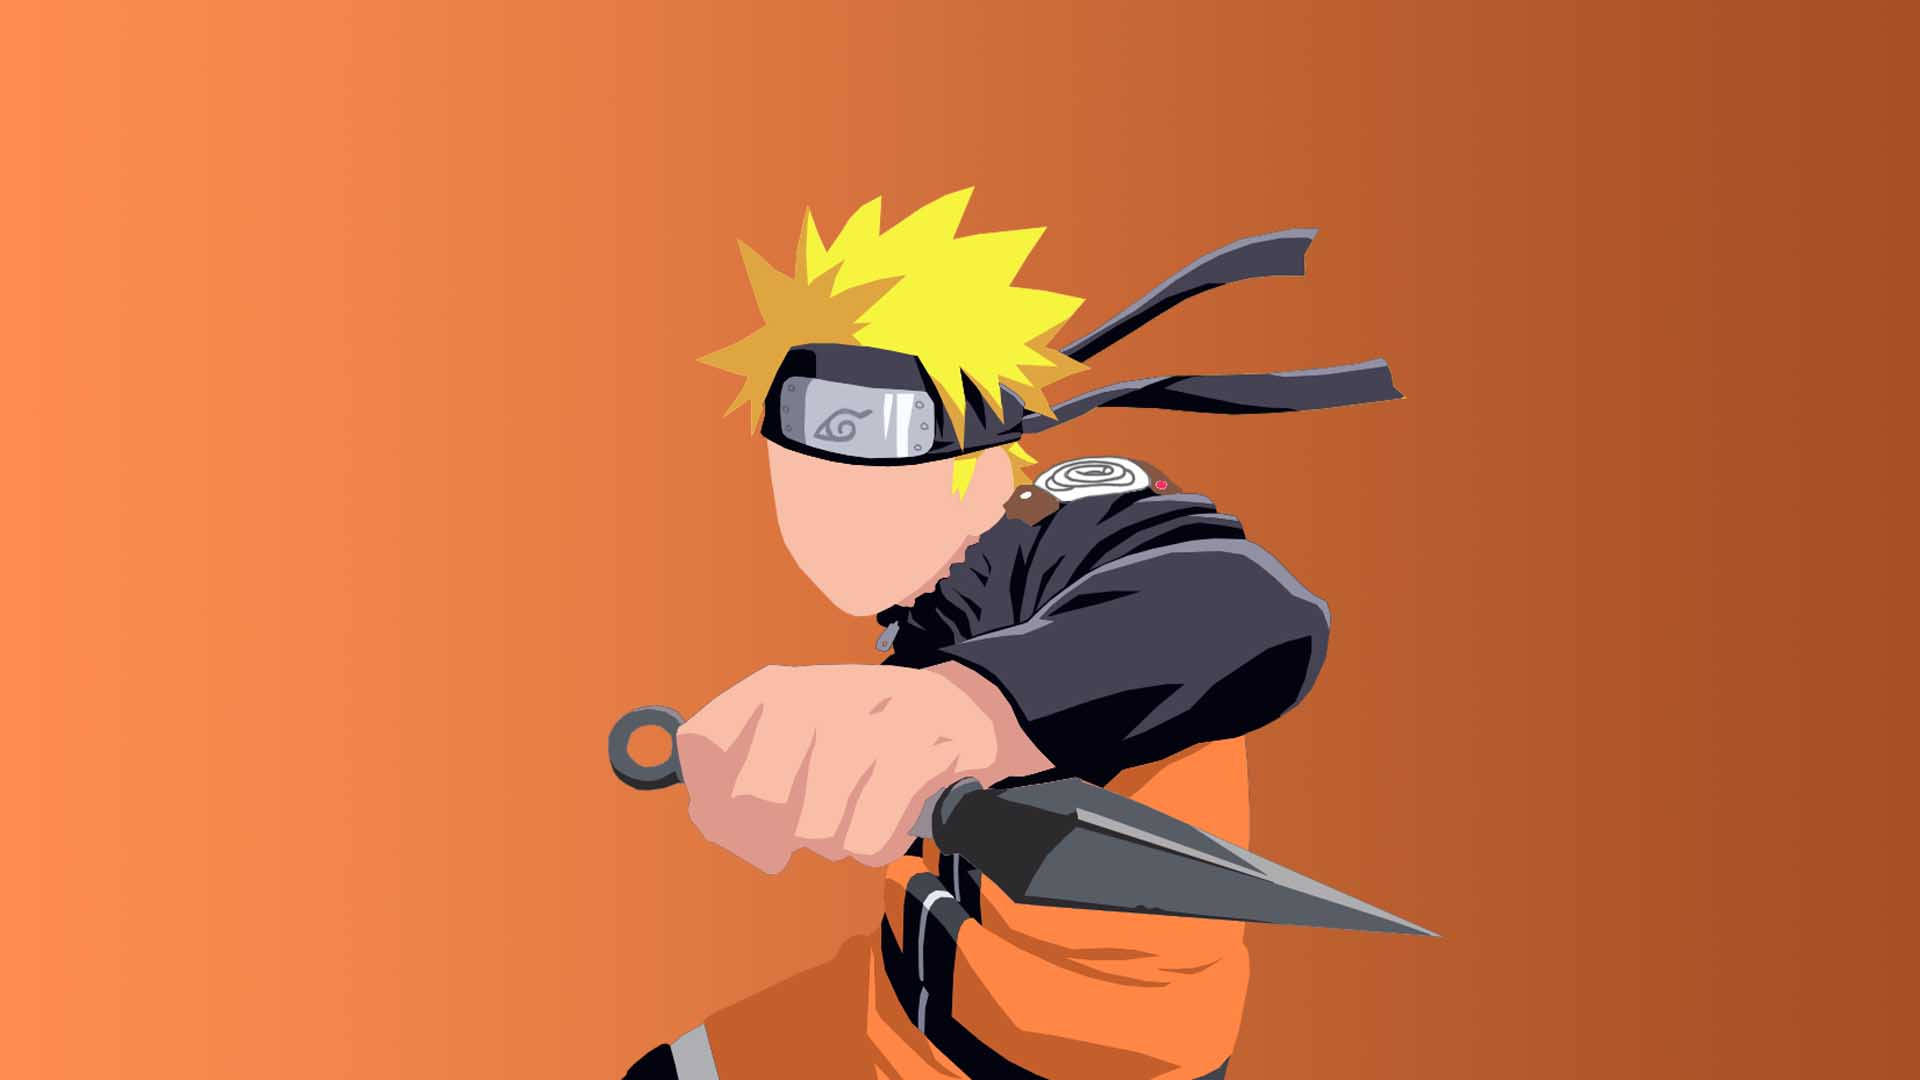 Naruto in his iconic yellow jumpsuit with a determined face Wallpaper